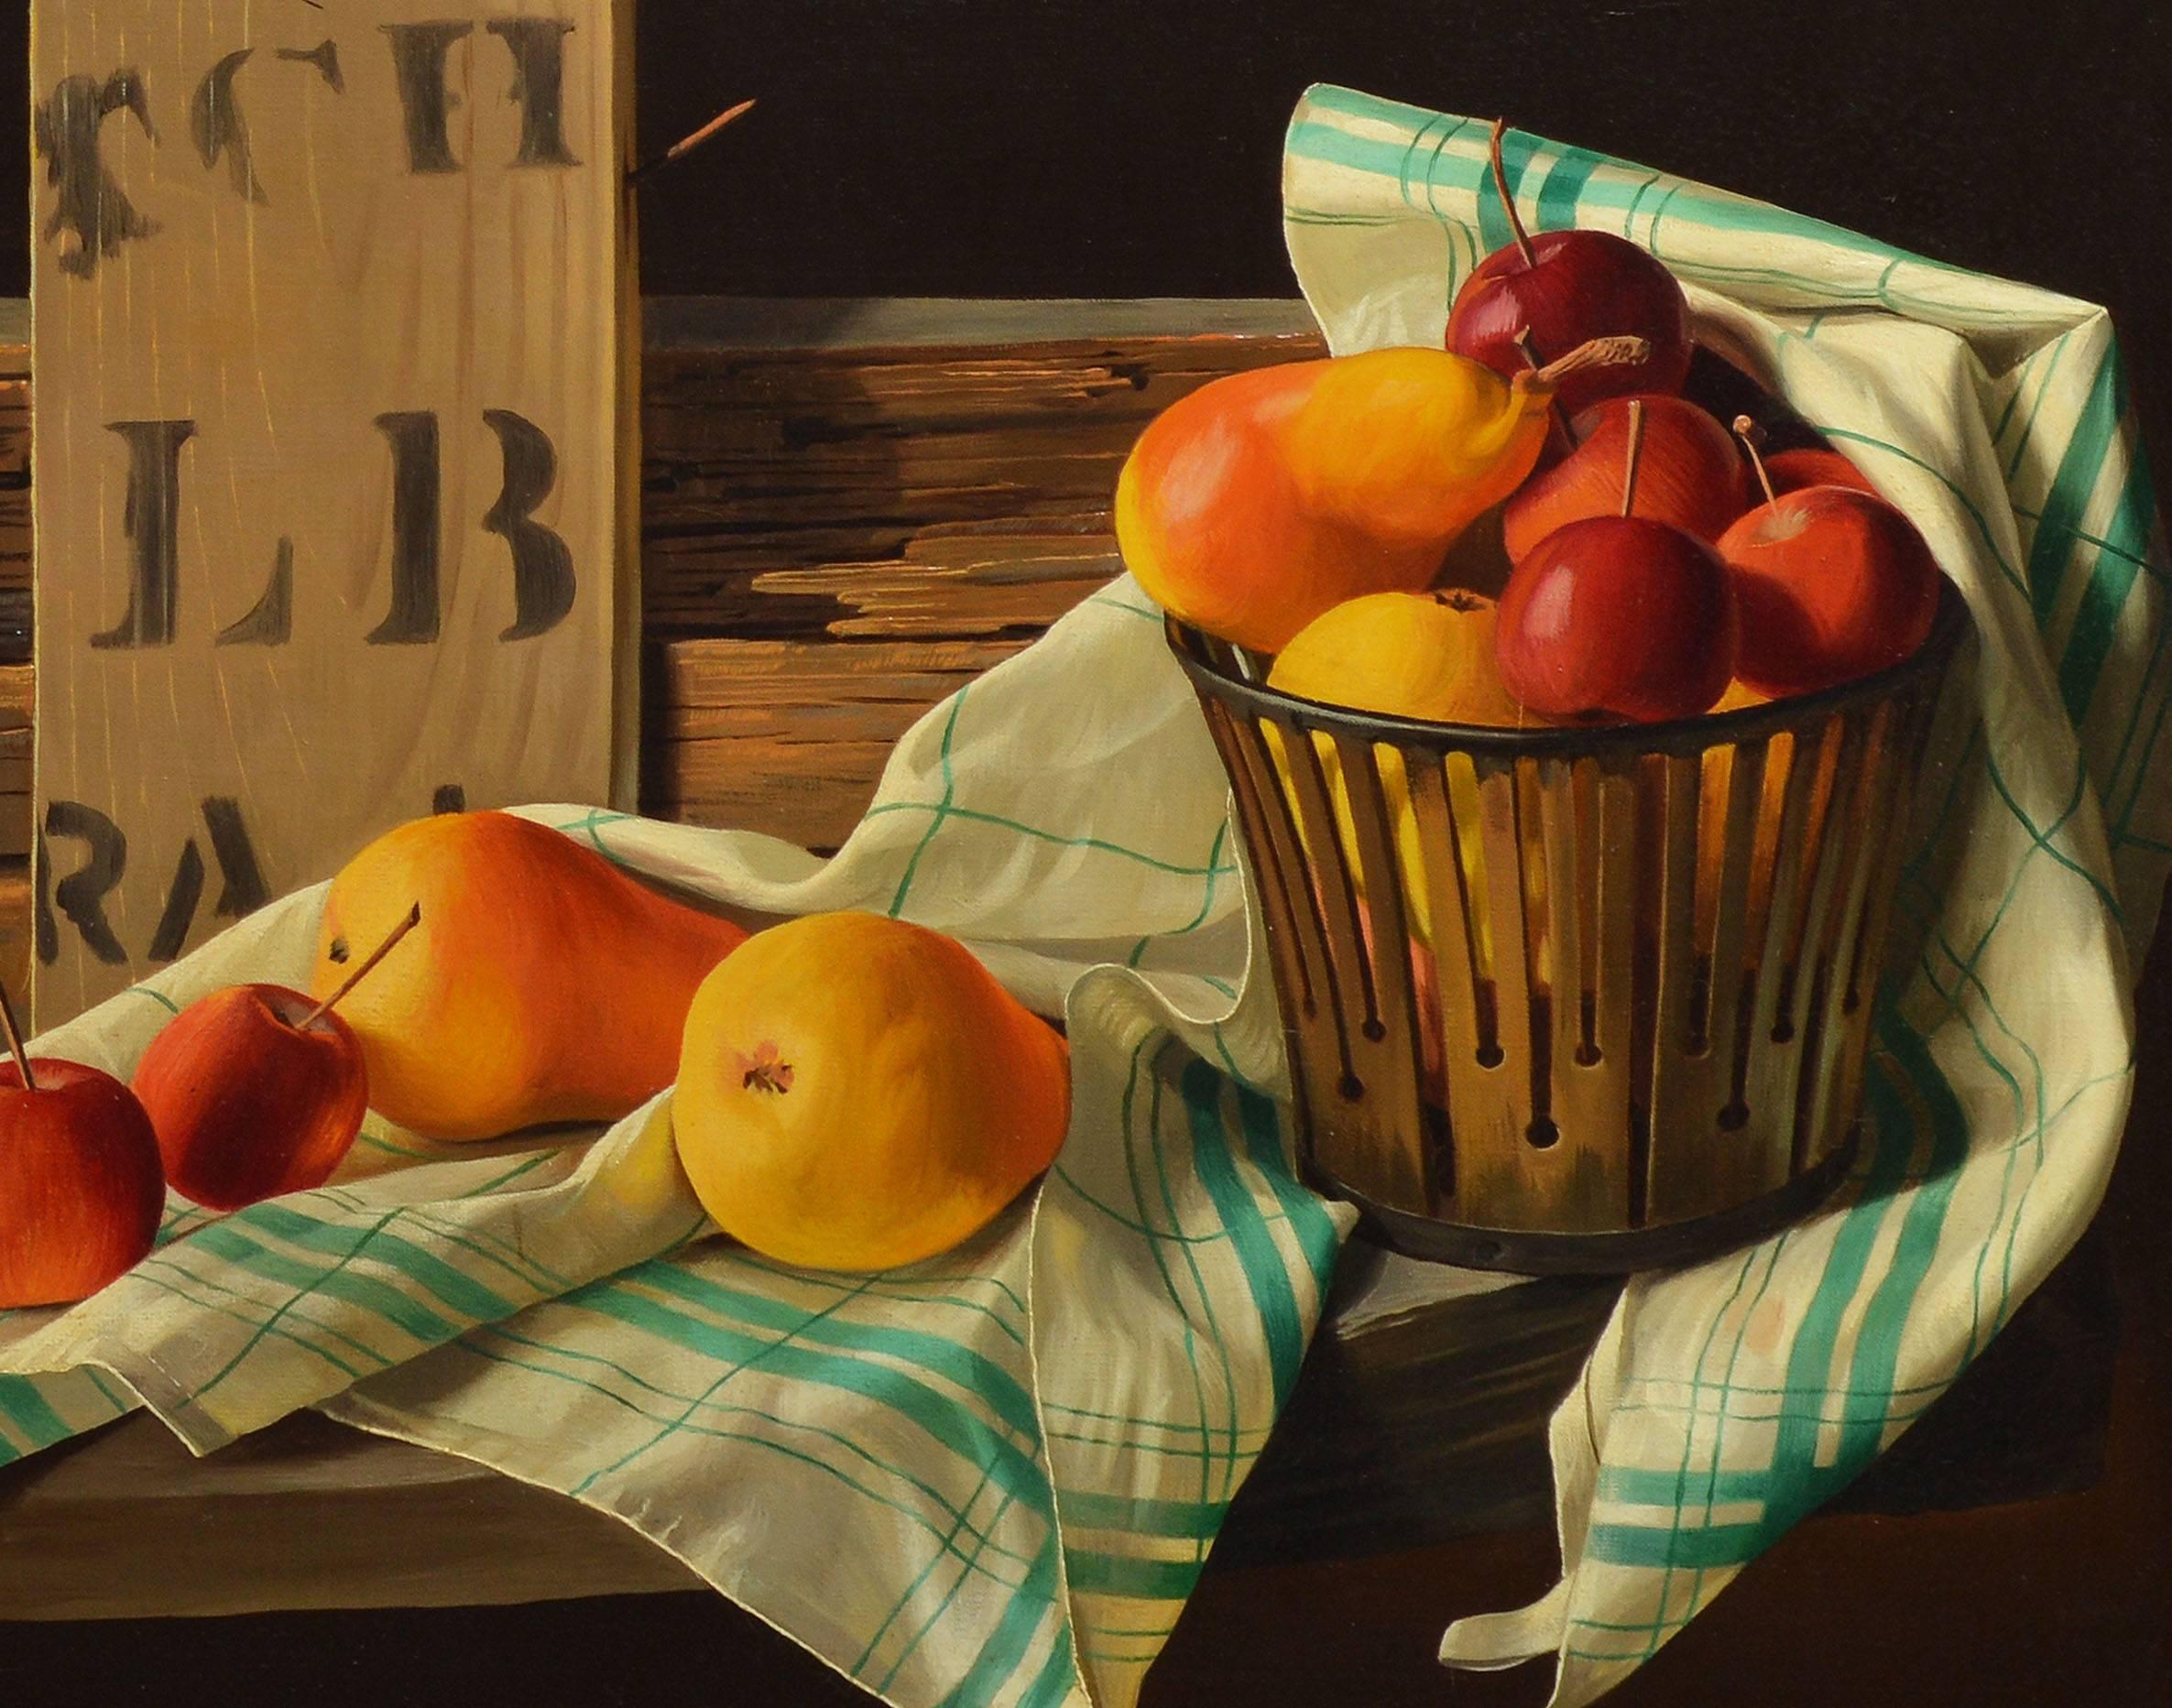 Trompe L'oeil fruit still life painting by Lodewijk Bruckman (1913-1980).  Oil on canvas, circa 1958.  Displayed in a modernist wood frame.  Image size, 20